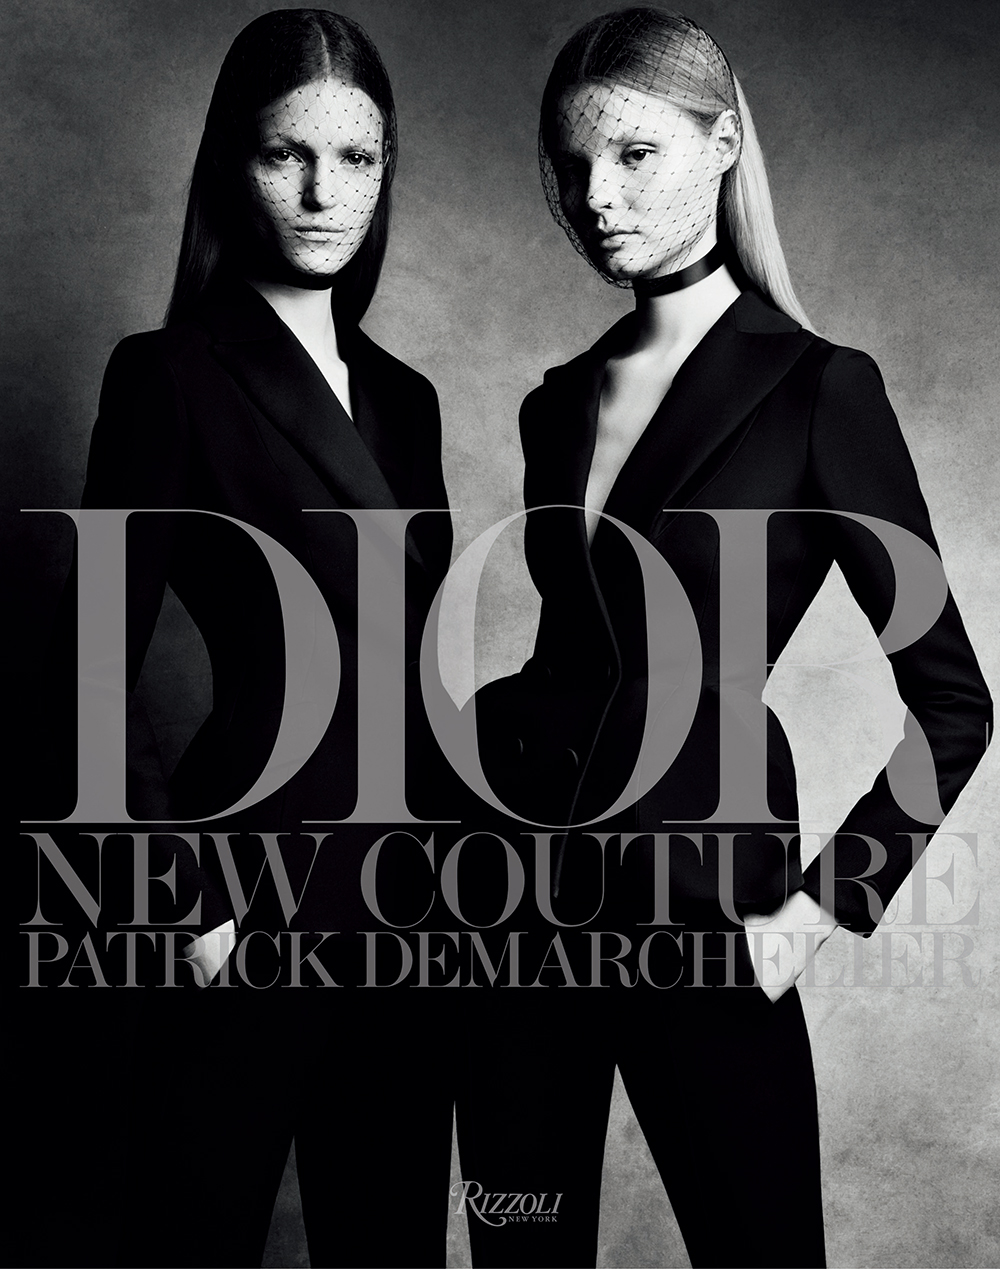 Dior 2014 Patrick Demarchelier New Couture Cover